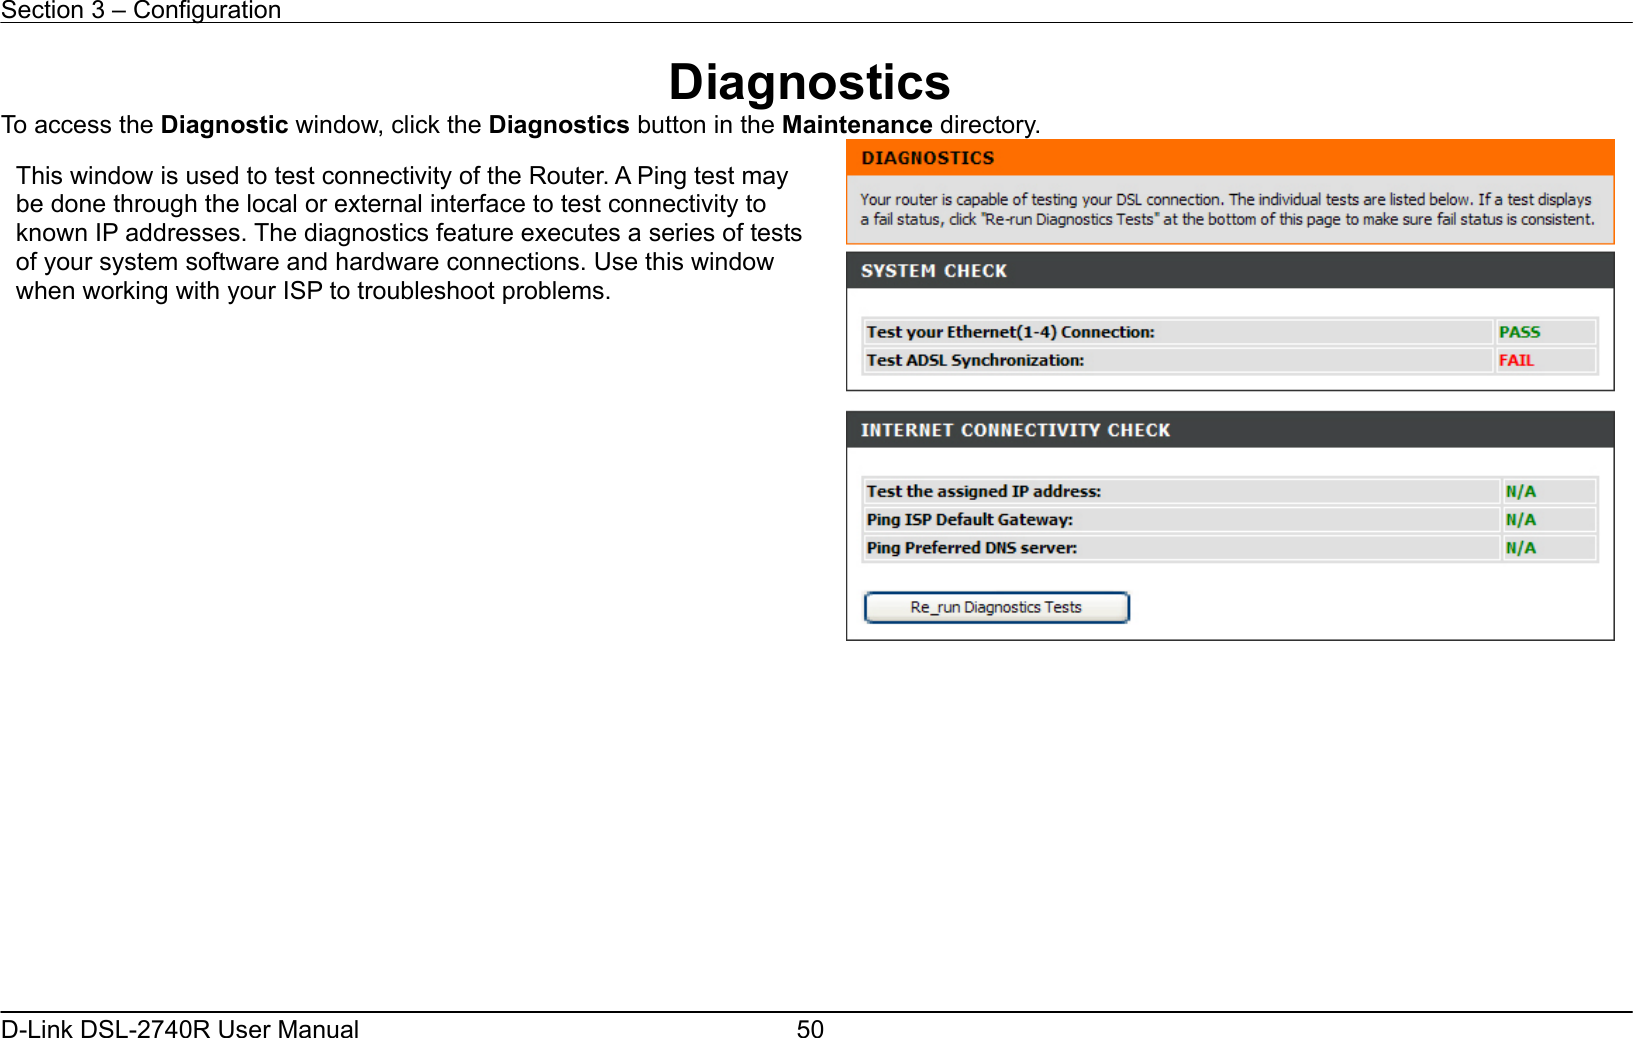 Section 3 – Configuration   D-Link DSL-2740R User Manual  50Diagnostics To access the Diagnostic window, click the Diagnostics button in the Maintenance directory.              This window is used to test connectivity of the Router. A Ping test may be done through the local or external interface to test connectivity to known IP addresses. The diagnostics feature executes a series of tests of your system software and hardware connections. Use this window when working with your ISP to troubleshoot problems. 